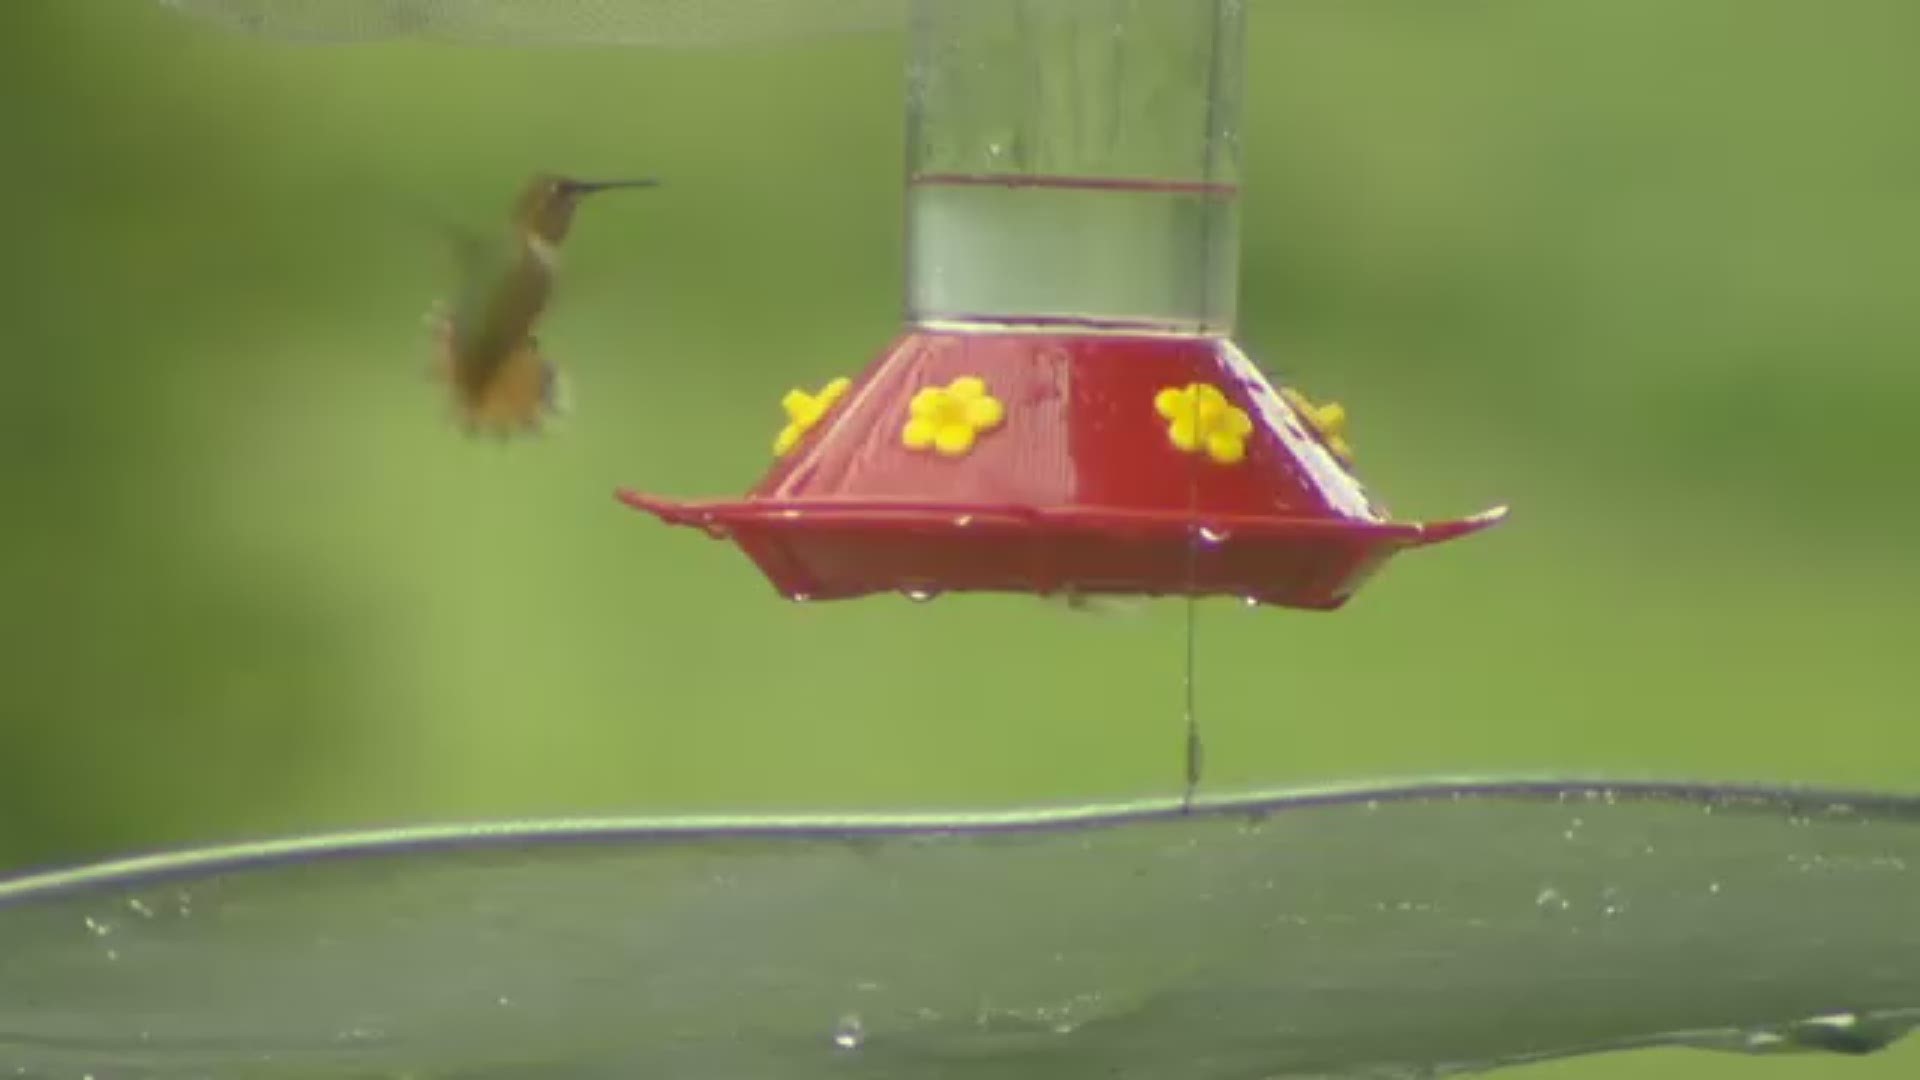 9NEWS Photojournalist Anne Herbst is getting you up close personal with the sights and sounds of hummingbirds.